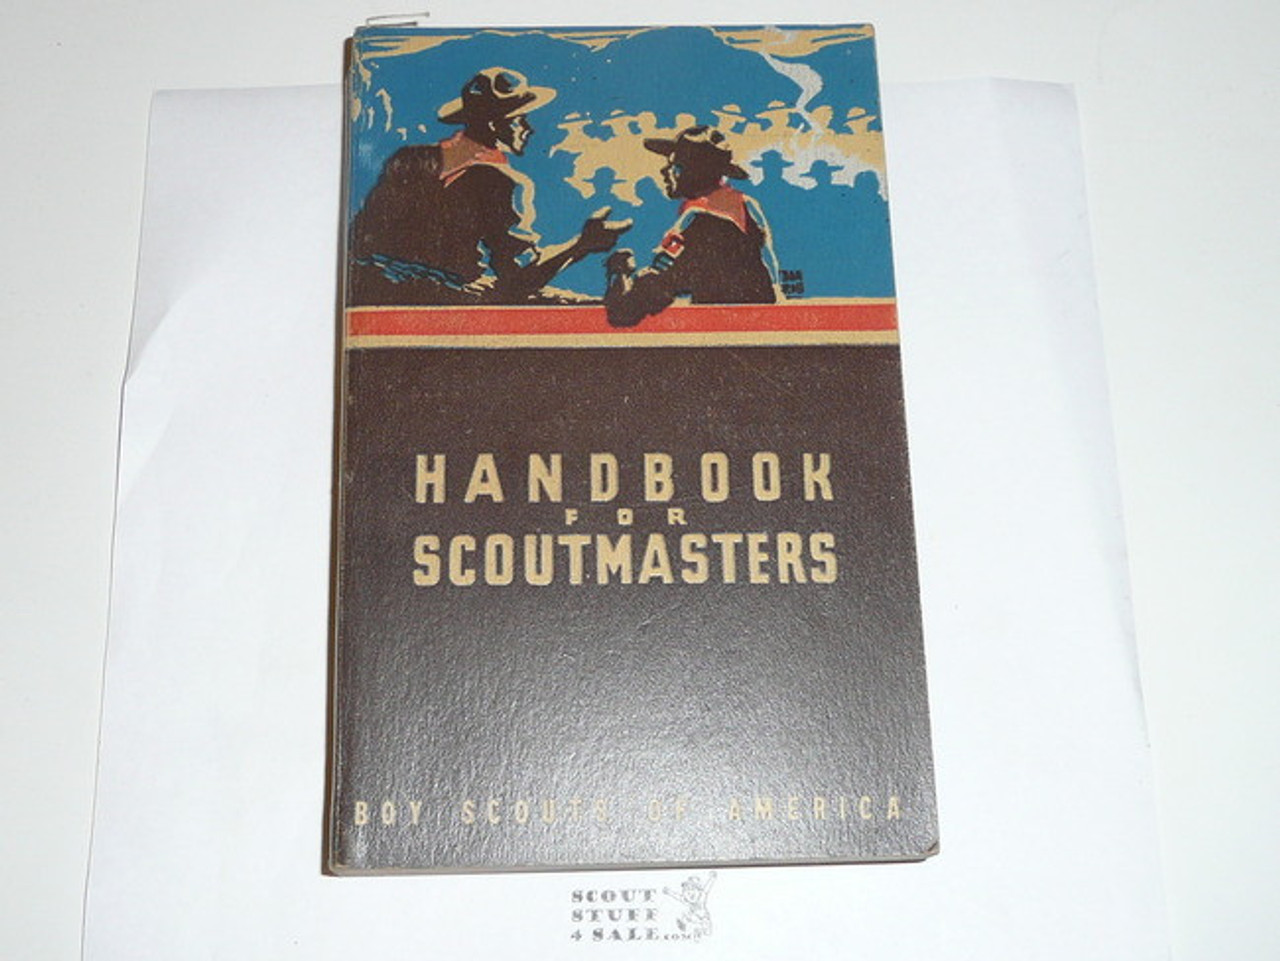 1948 Handbook For Scoutmasters, Fourth Edition, Third Printing (10-48), MINT Condition